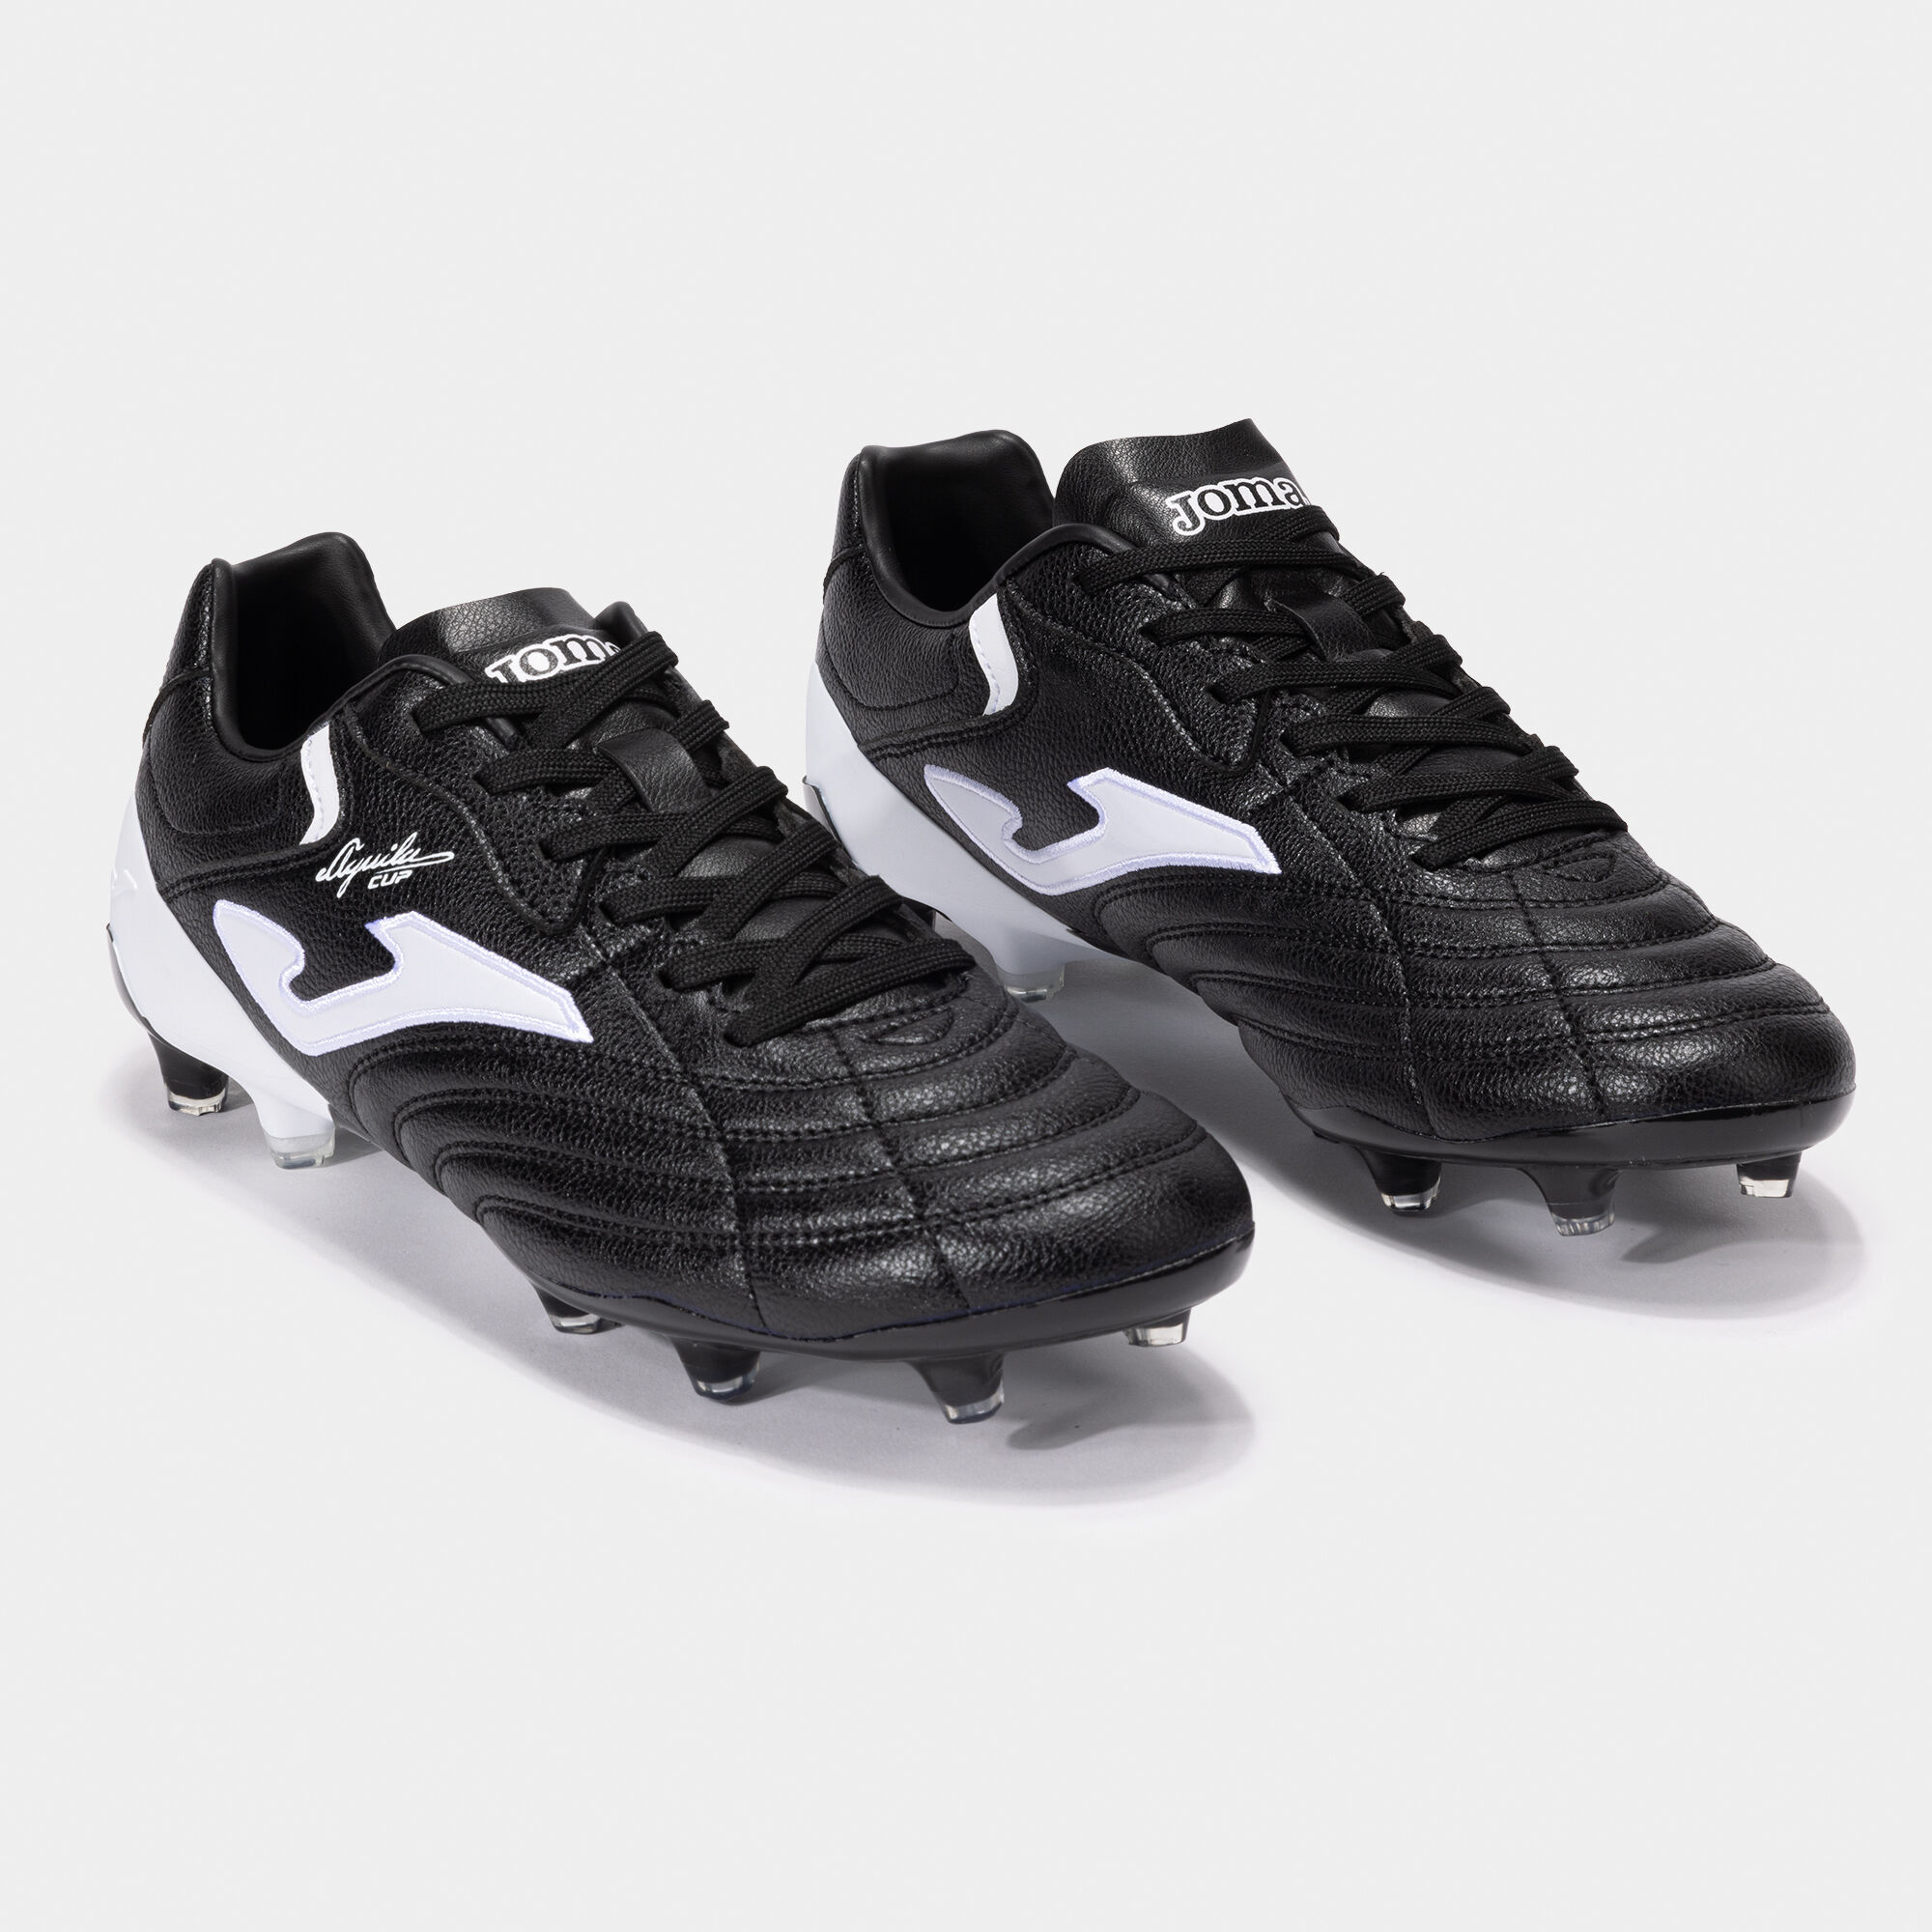 Football boots Aguila Cup 24 firm ground FG black white